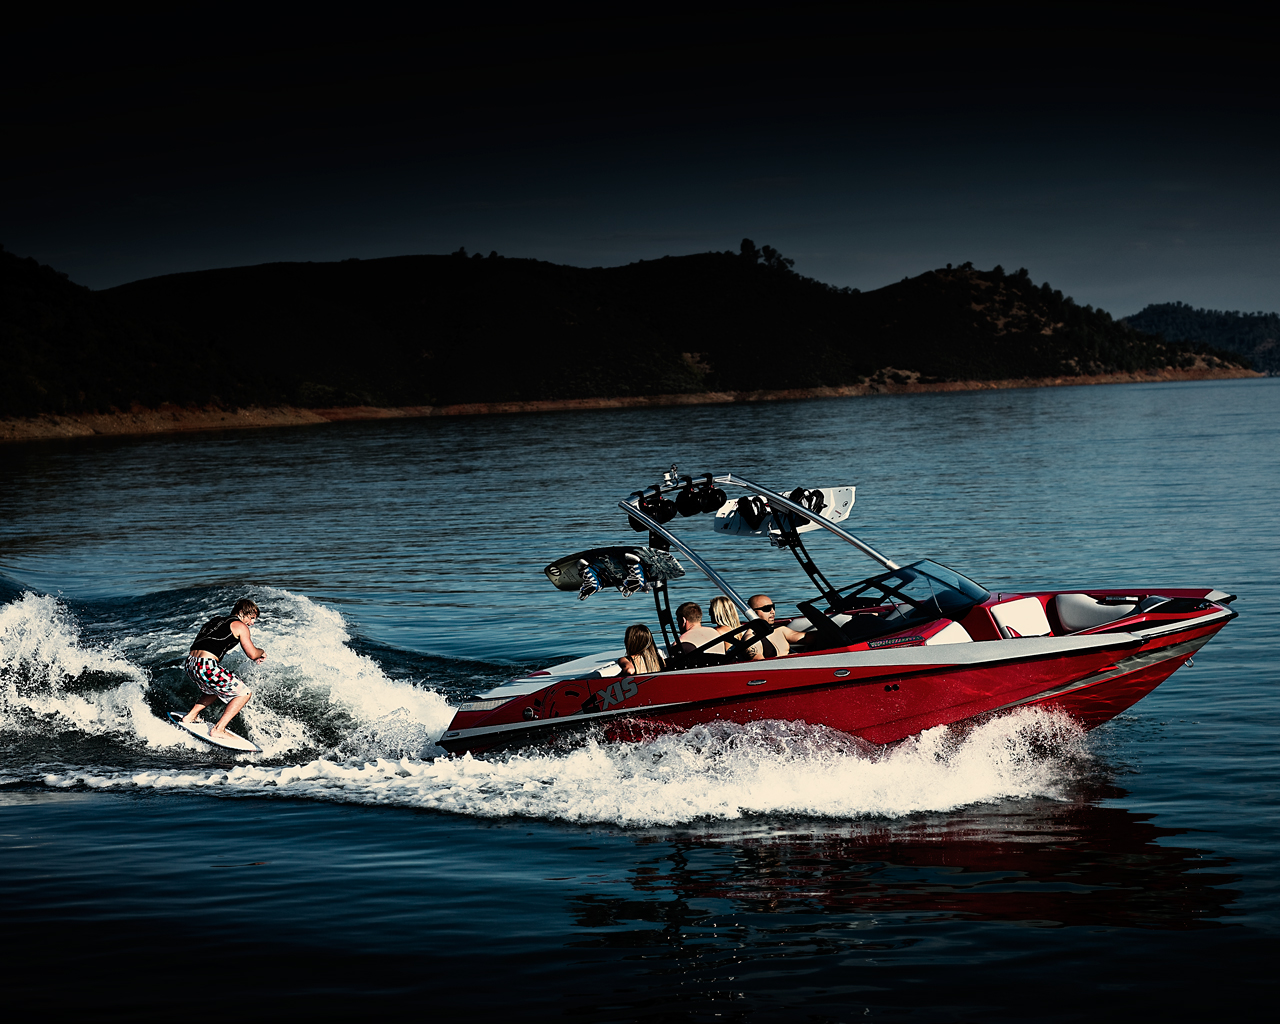 Mastercraft Wallpaper Image Pictures Becuo